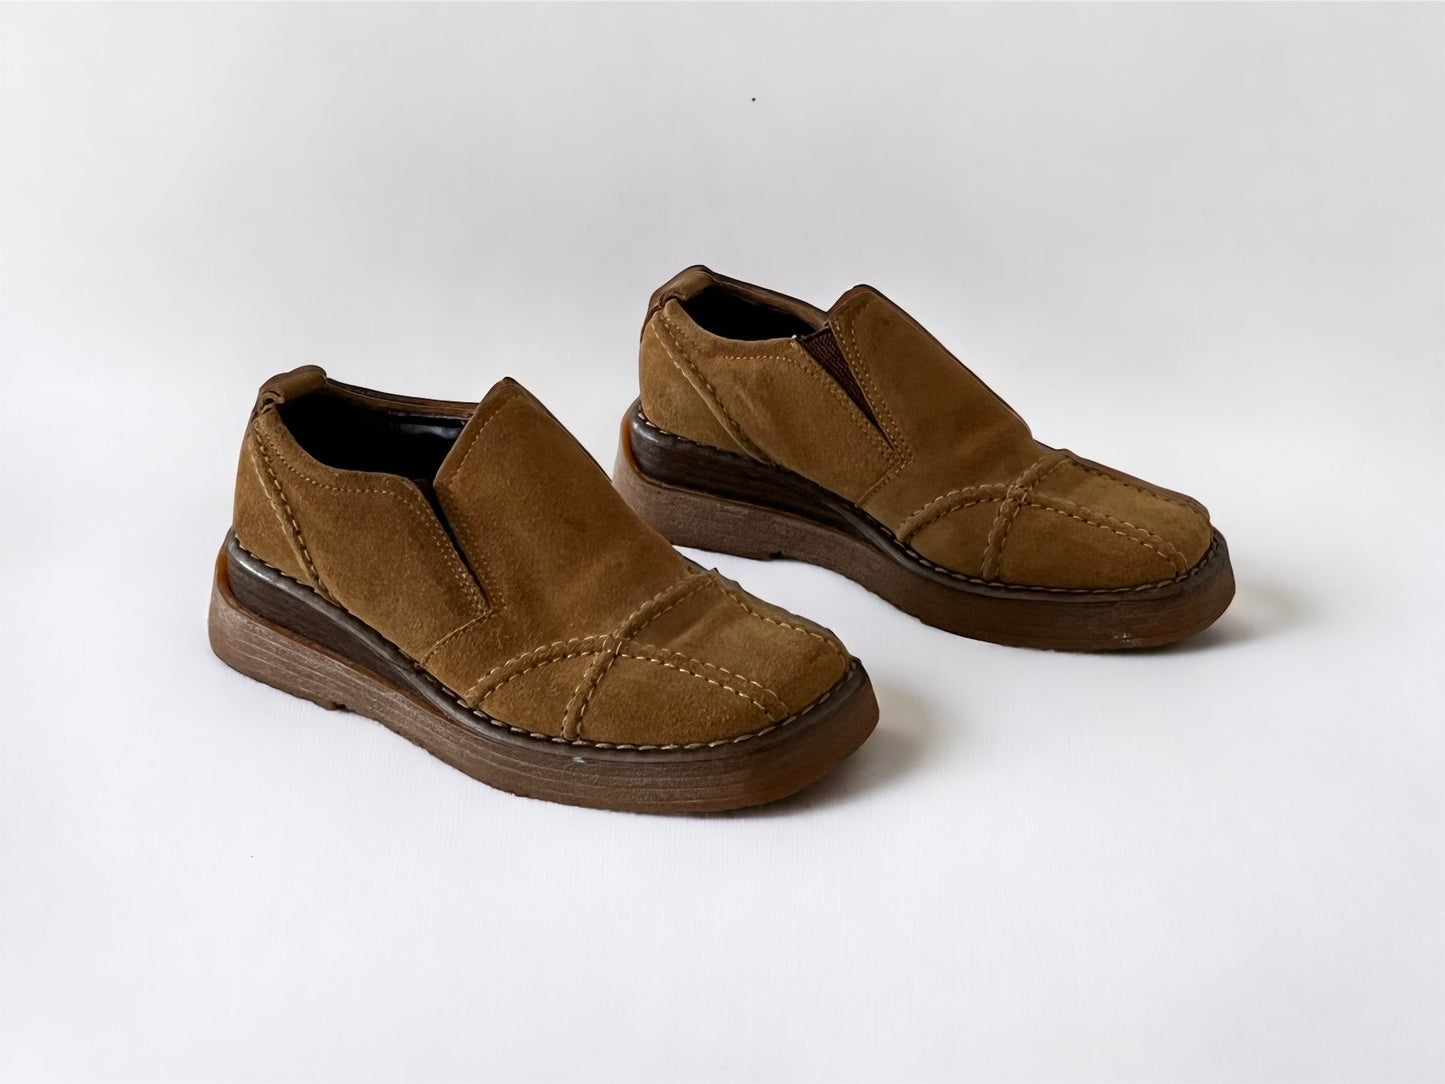 Frye Suede Loafers